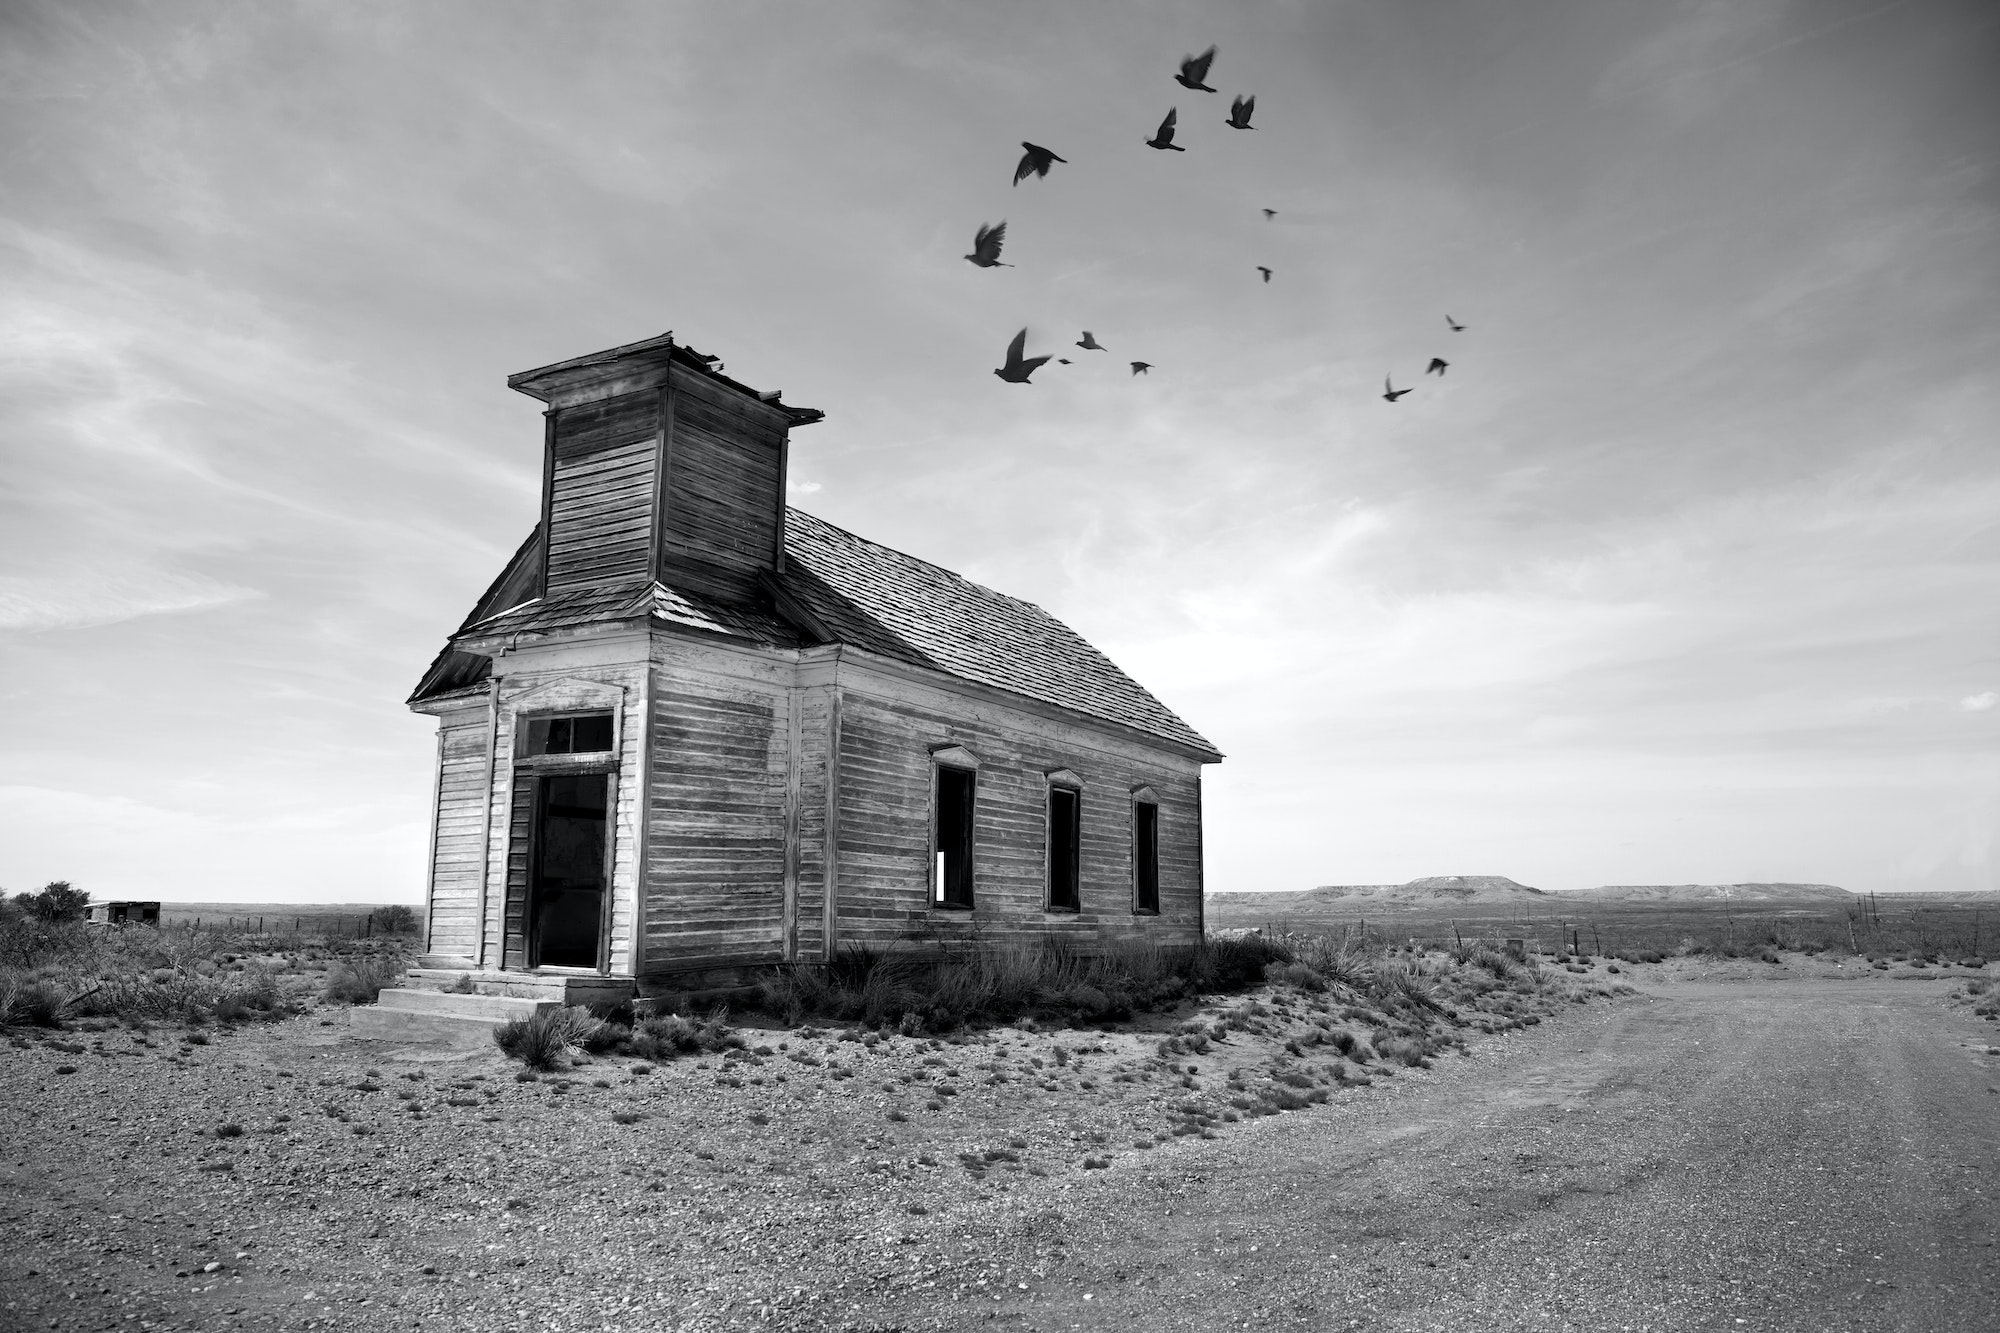 Exterior view of abandoned wooden chapel in remote area, flock of birds in cloudy sky.